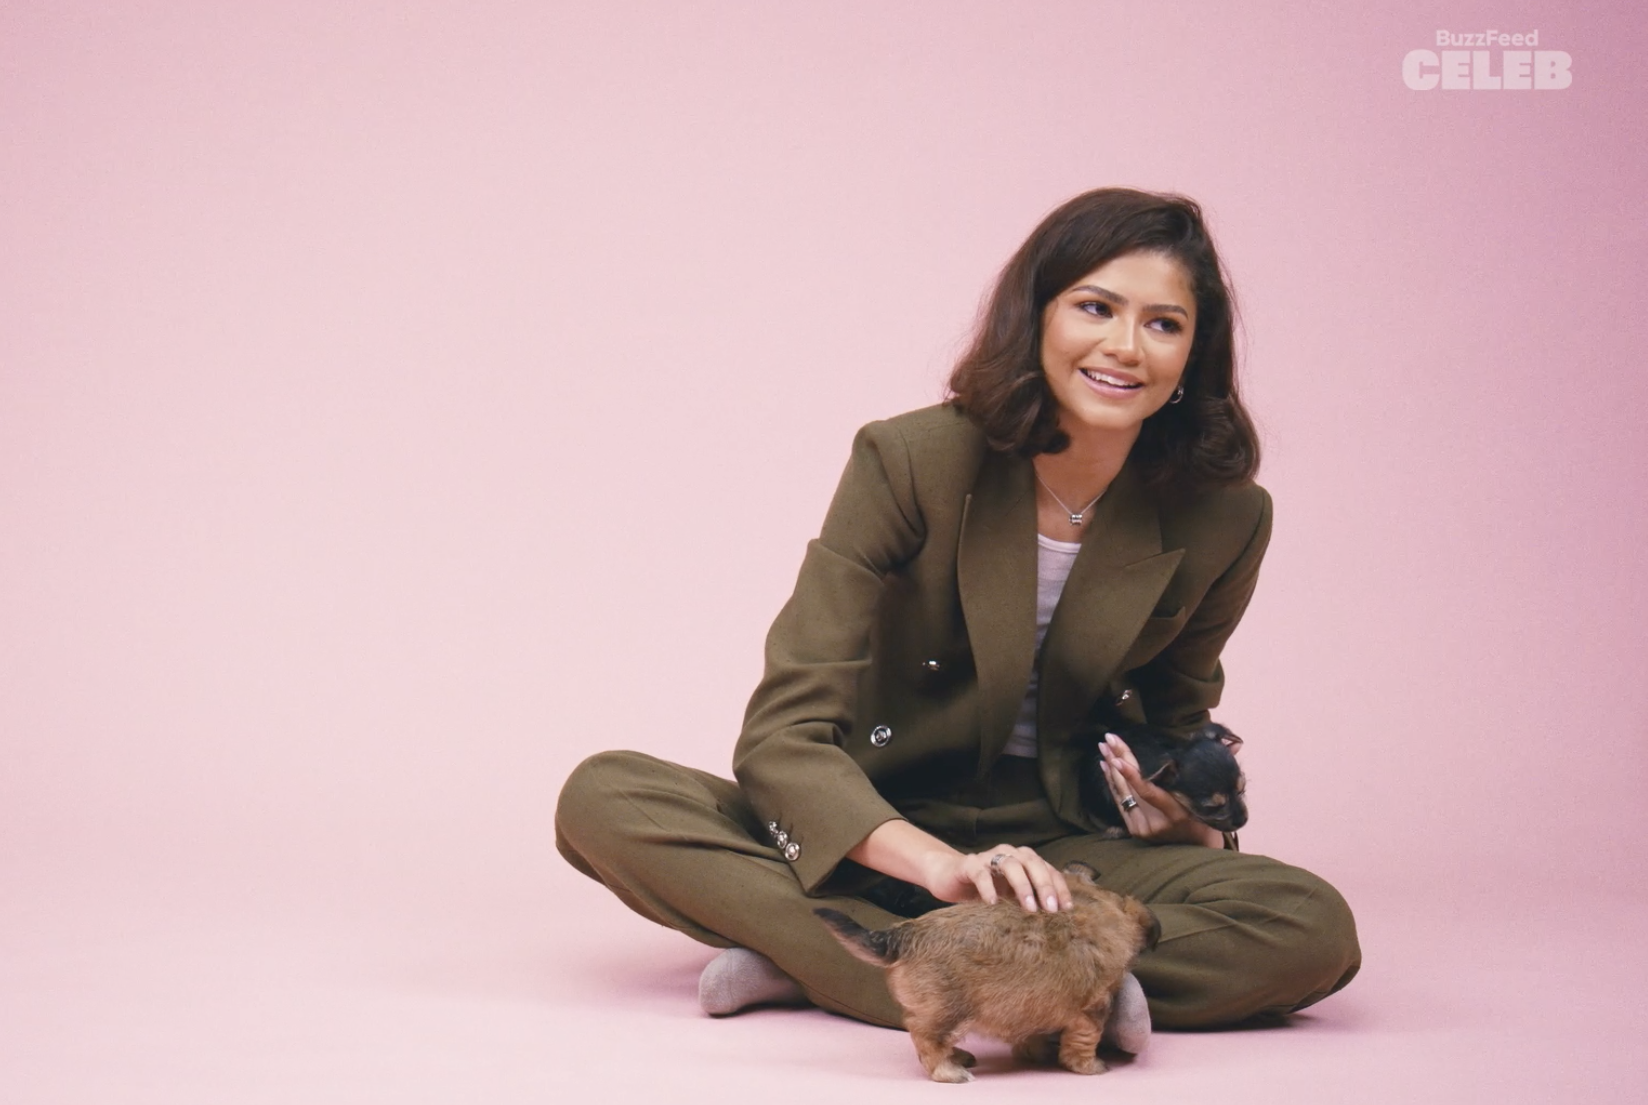 Zendaya, in a pantsuit, sits on the floor with a puppy against a pink backdrop